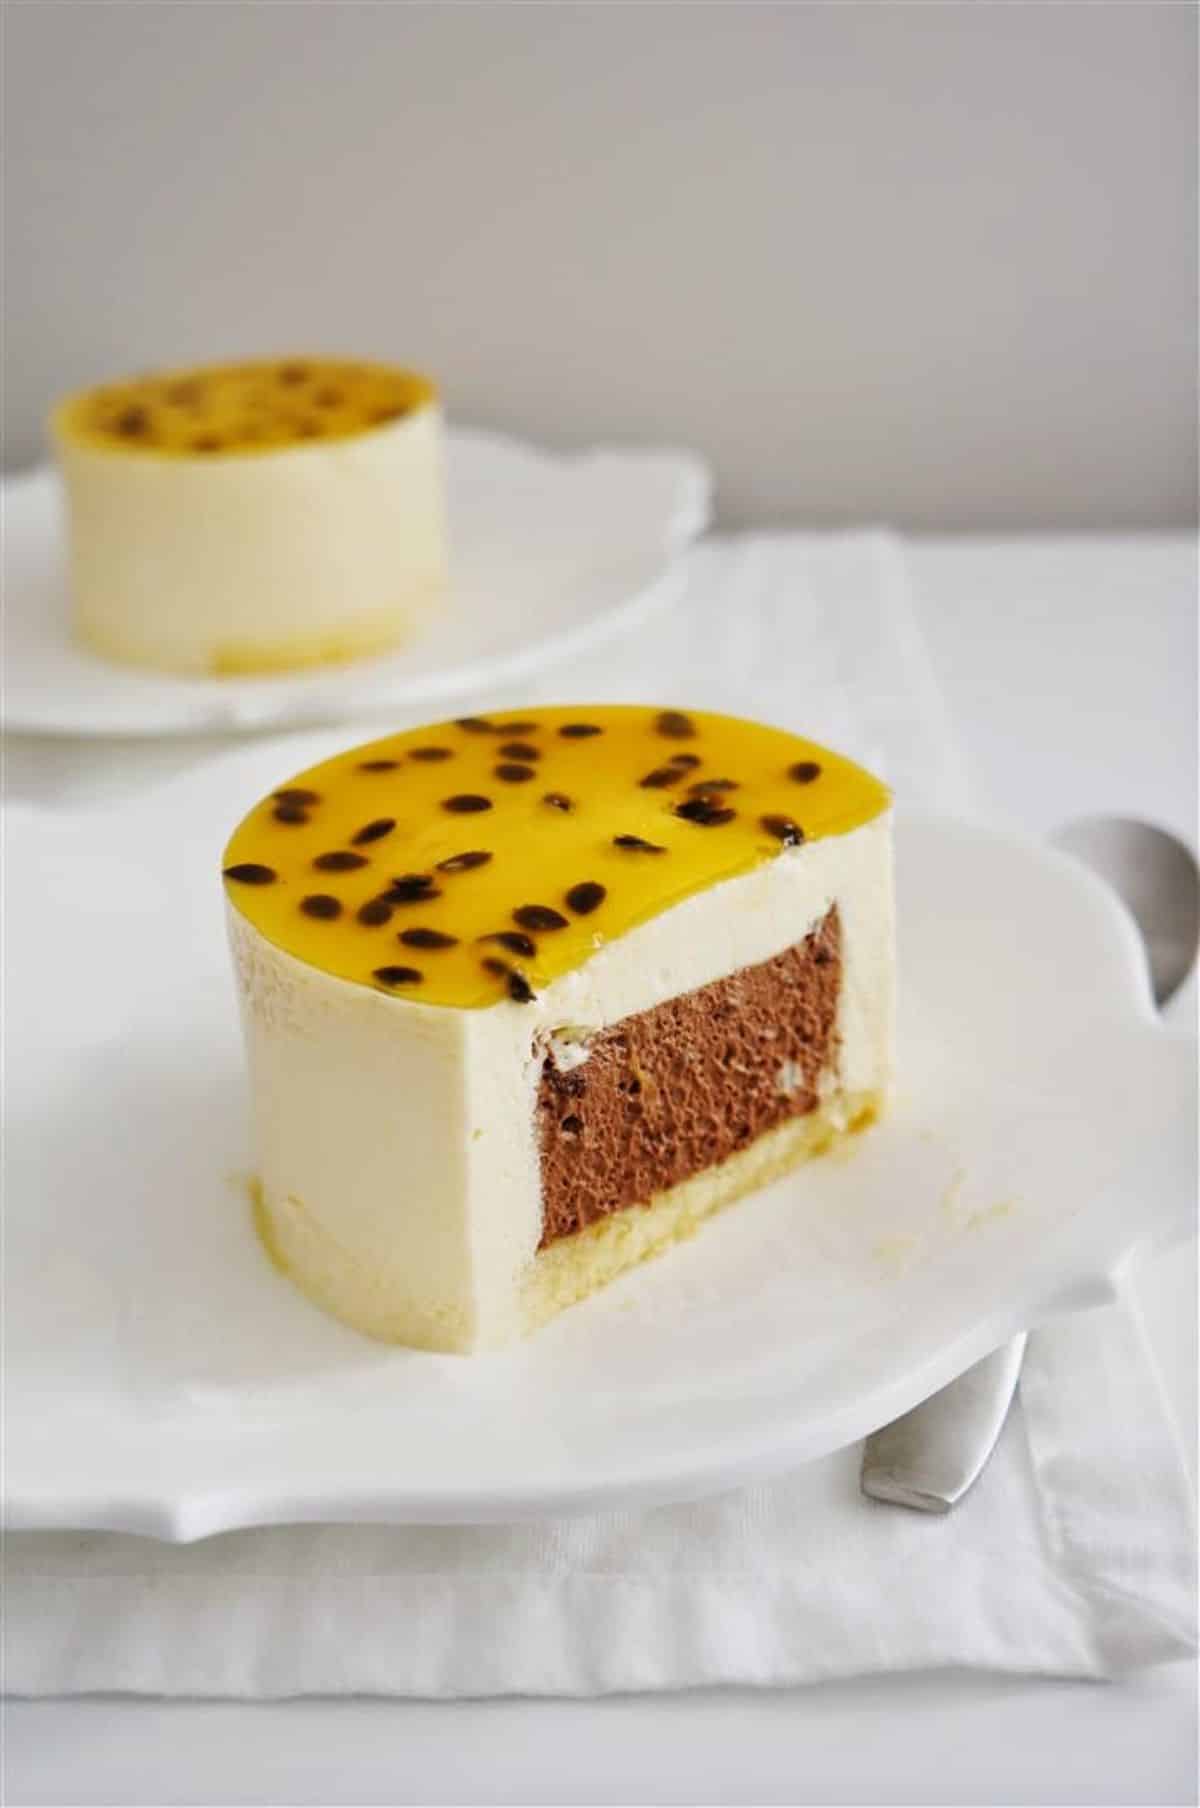 Mouth-watering passion fruit and chocolate entremet on a cake tray.